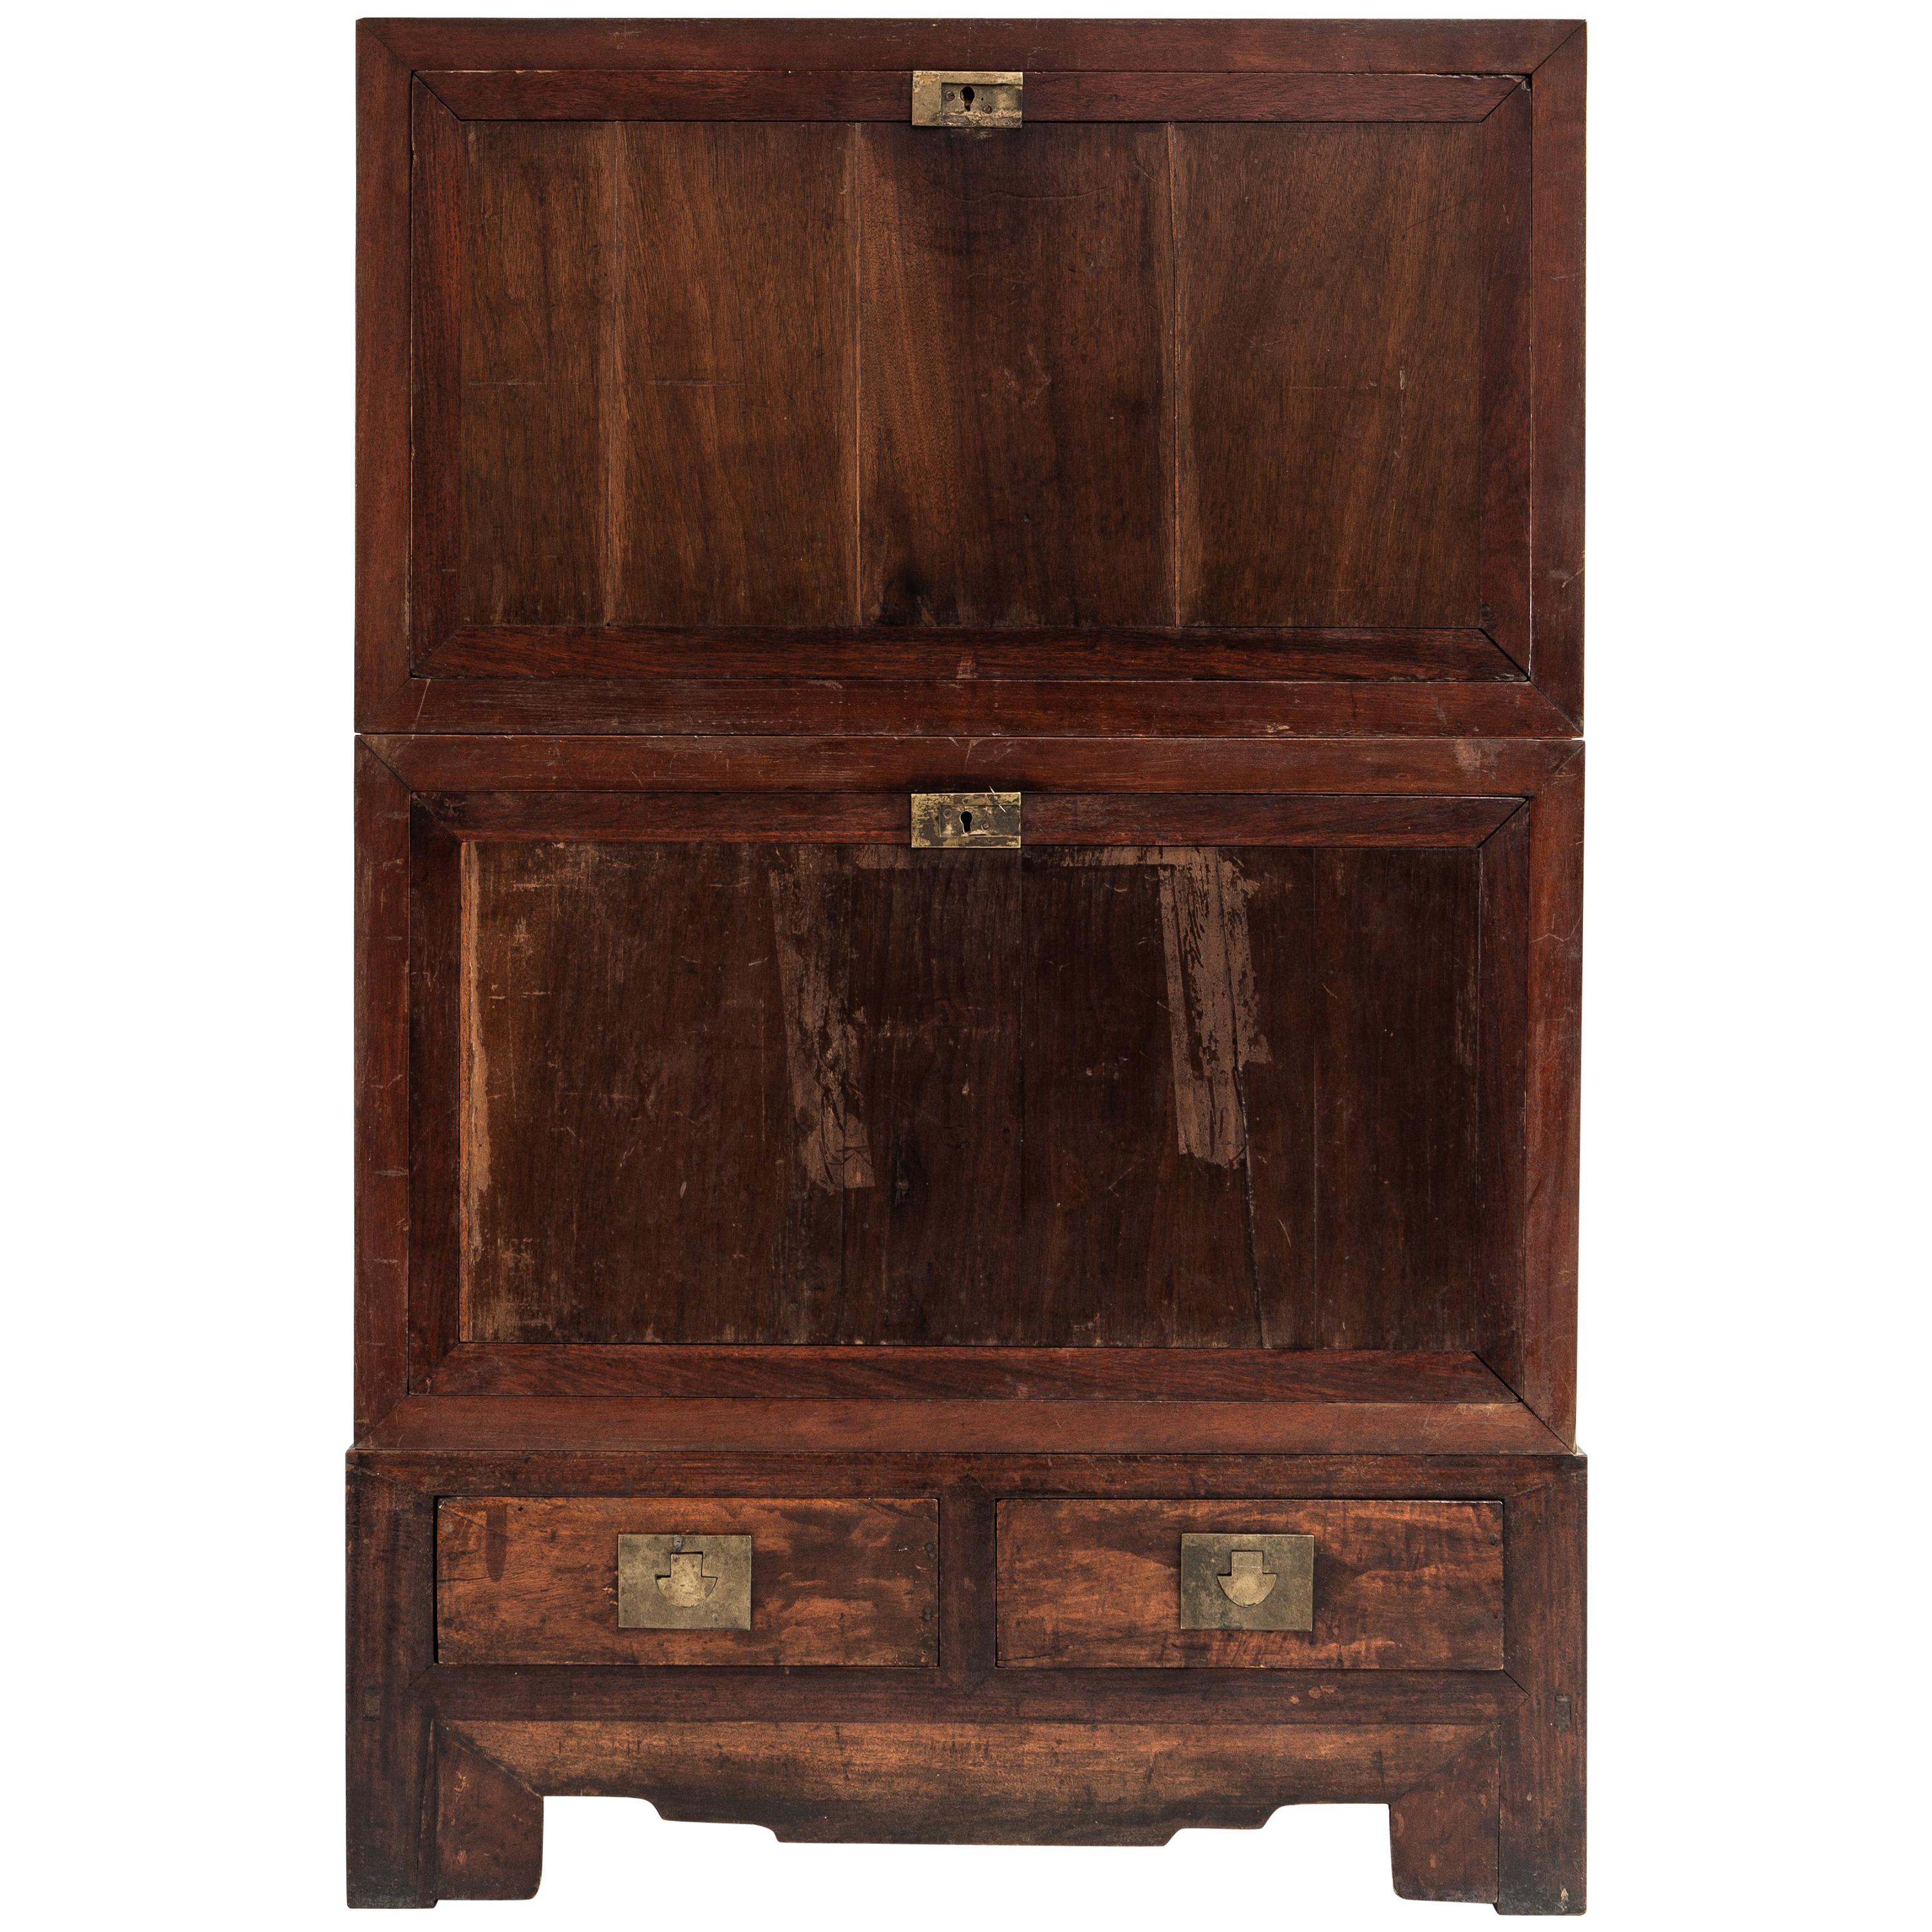 Chinese Cabinet with Two Doors and Two Drawers